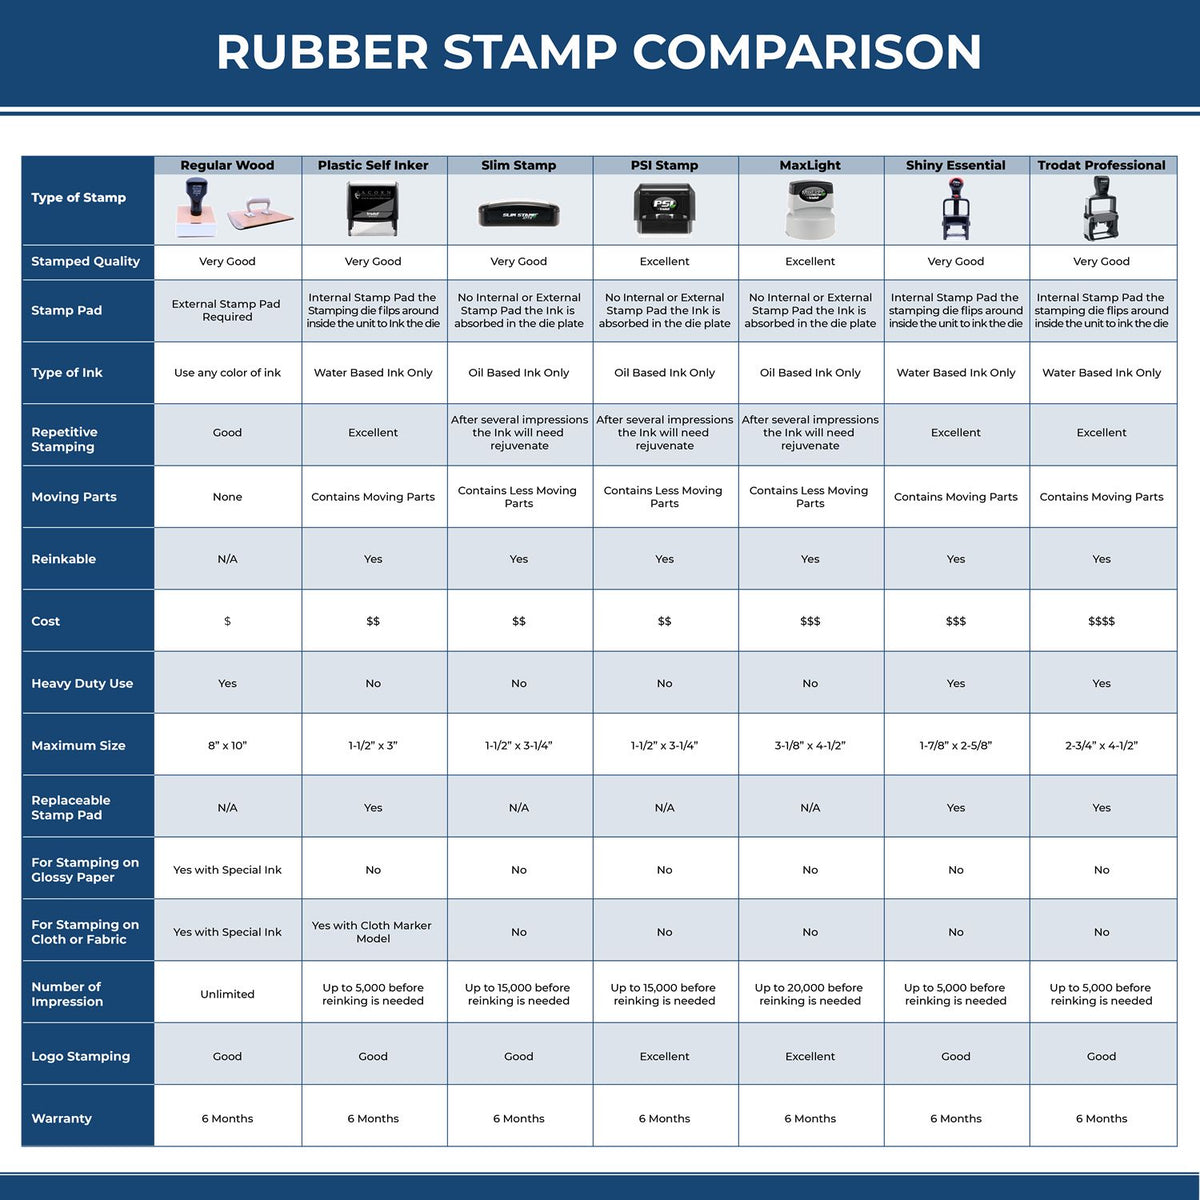 A comparison chart for the different types of mount models available for the Super Slim Missouri Notary Public Stamp.